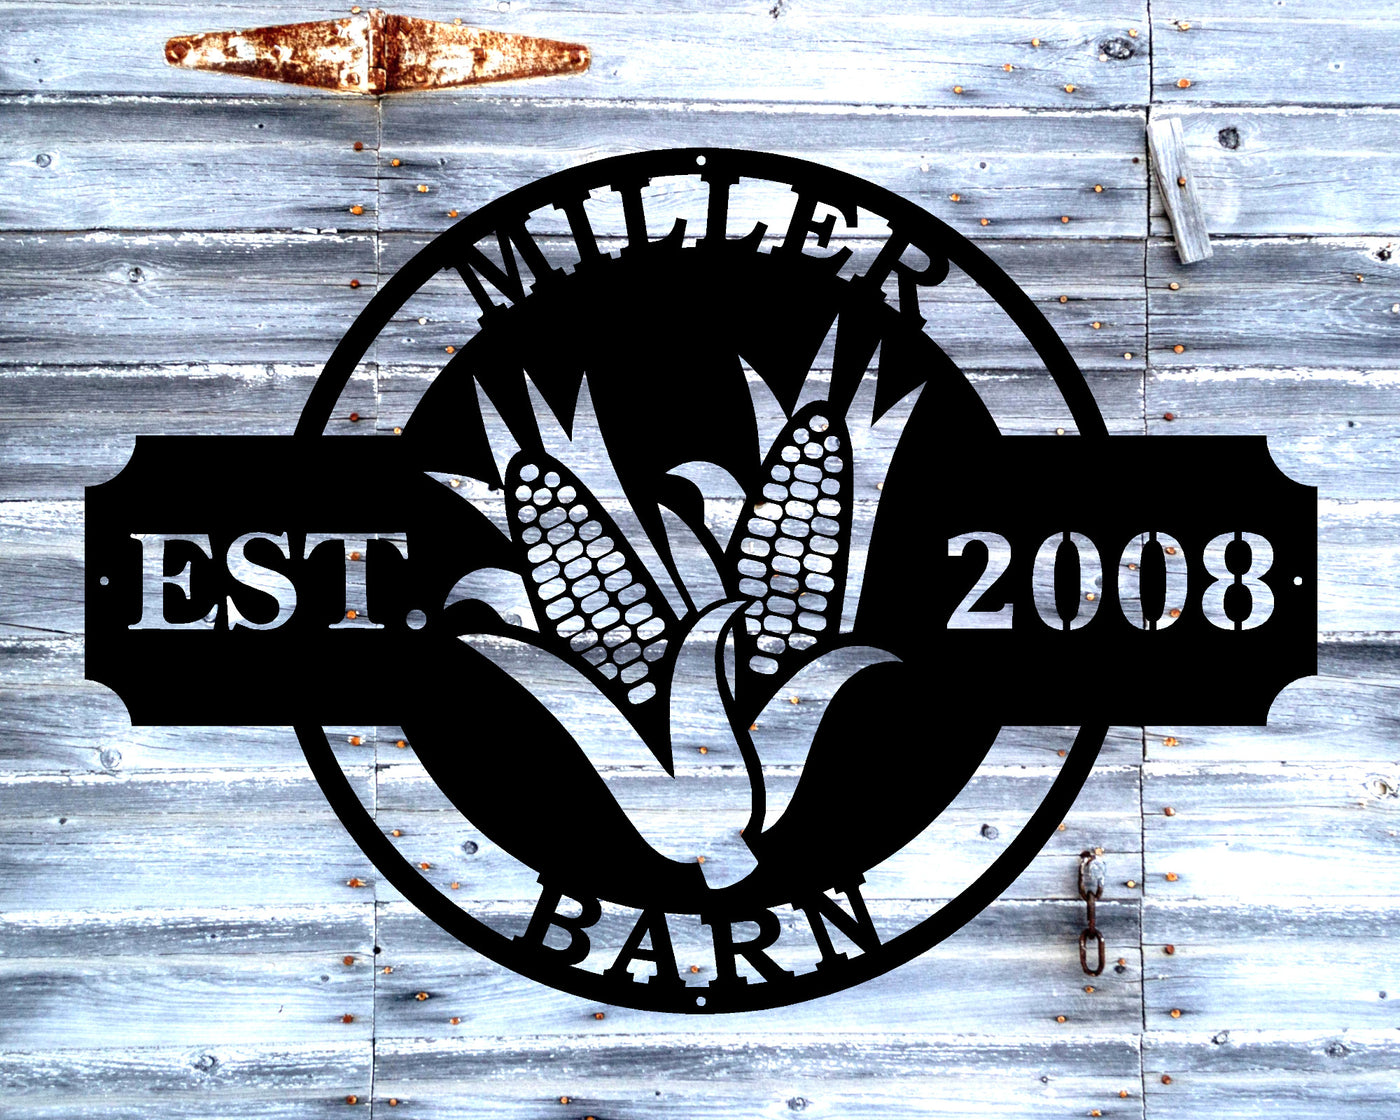 Personalized Corn Stalk Metal Sign with Name and Established Date - Madison Iron and Wood - Personalized sign - metal outdoor decor - Steel deocrations - american made products - veteran owned business products - fencing decorations - fencing supplies - custom wall decorations - personalized wall signs - steel - decorative post caps - steel post caps - metal post caps - brackets - structural brackets - home improvement - easter - easter decorations - easter gift - easter yard decor